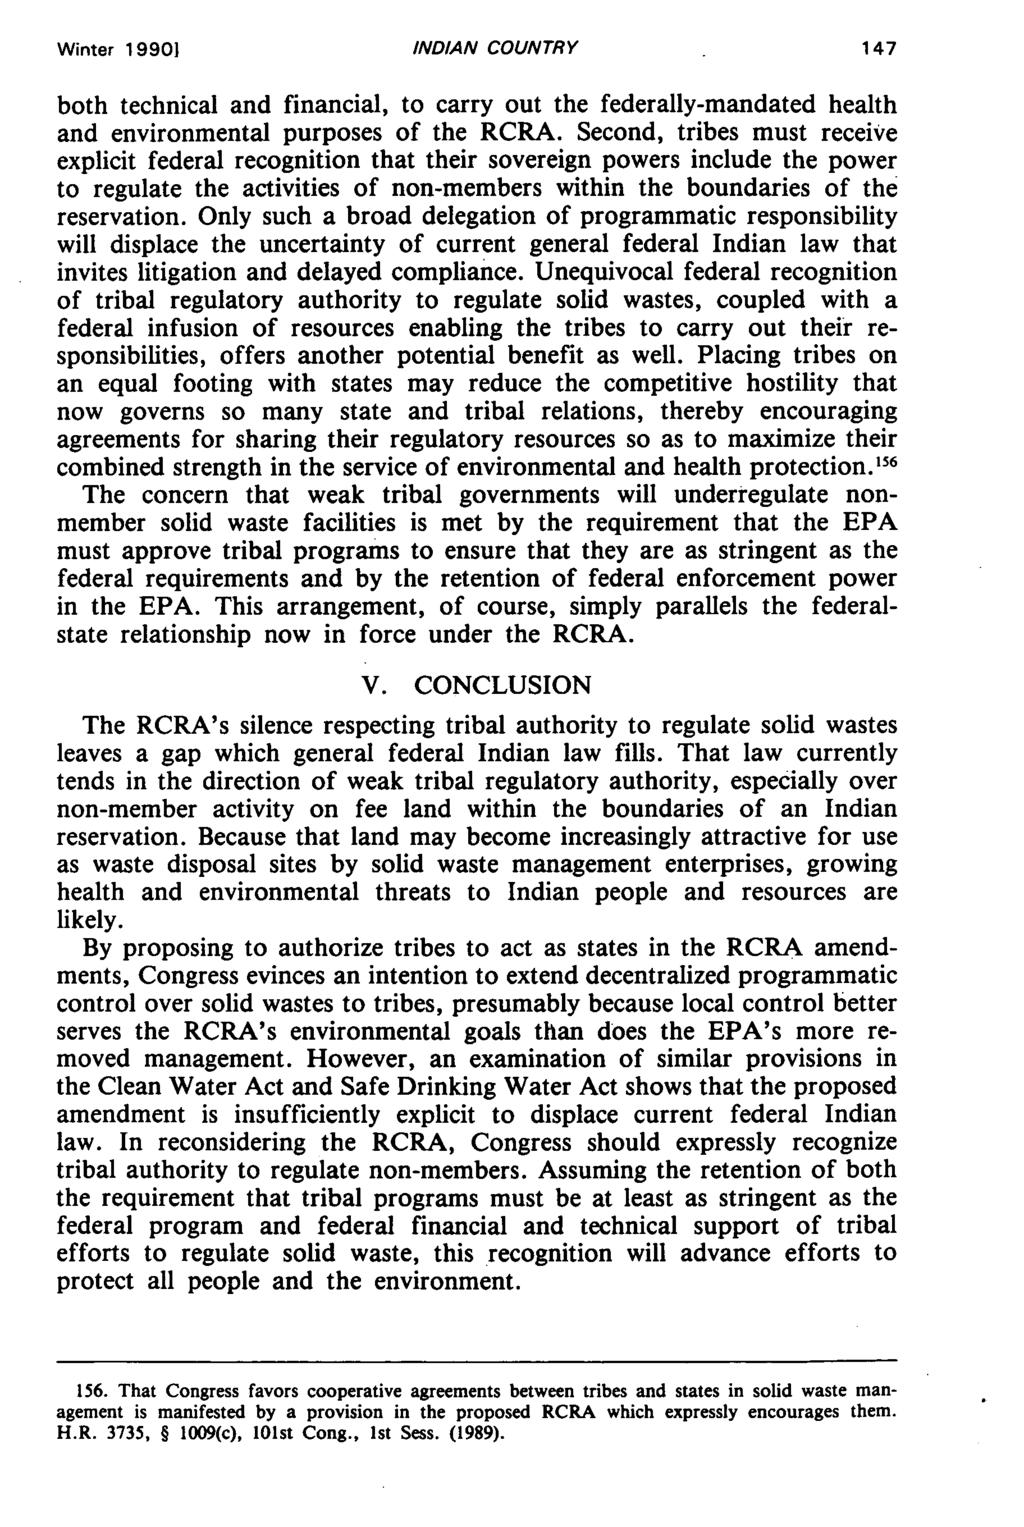 Winter 19901 INDIAN COUNTRY both technical and financial, to carry out the federally-mandated health and environmental purposes of the RCRA.